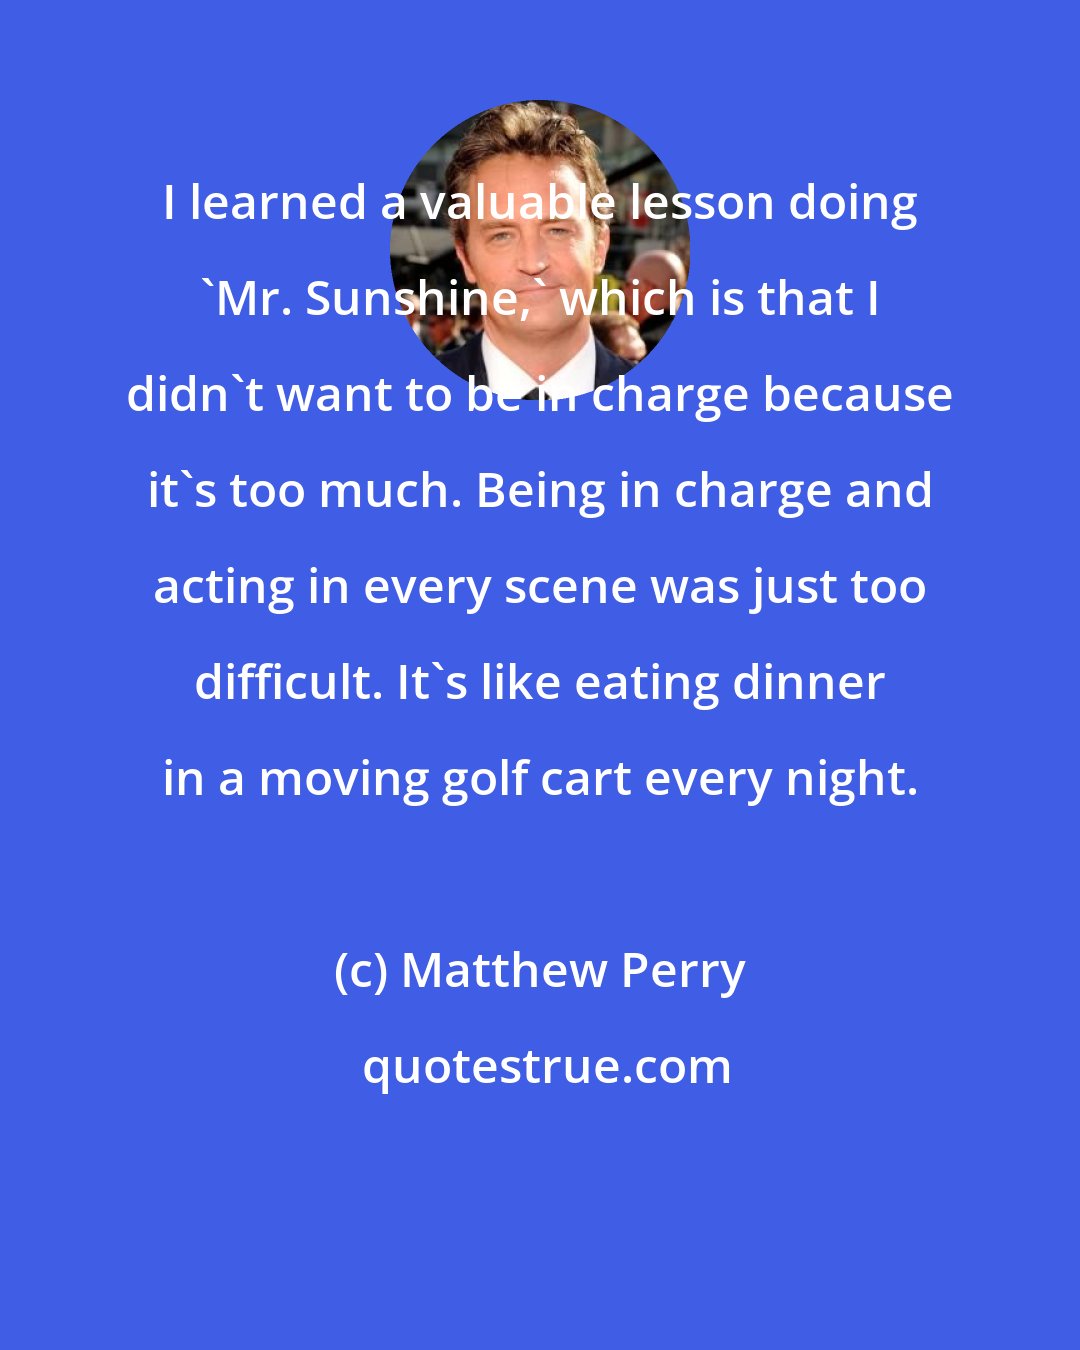 Matthew Perry: I learned a valuable lesson doing 'Mr. Sunshine,' which is that I didn't want to be in charge because it's too much. Being in charge and acting in every scene was just too difficult. It's like eating dinner in a moving golf cart every night.